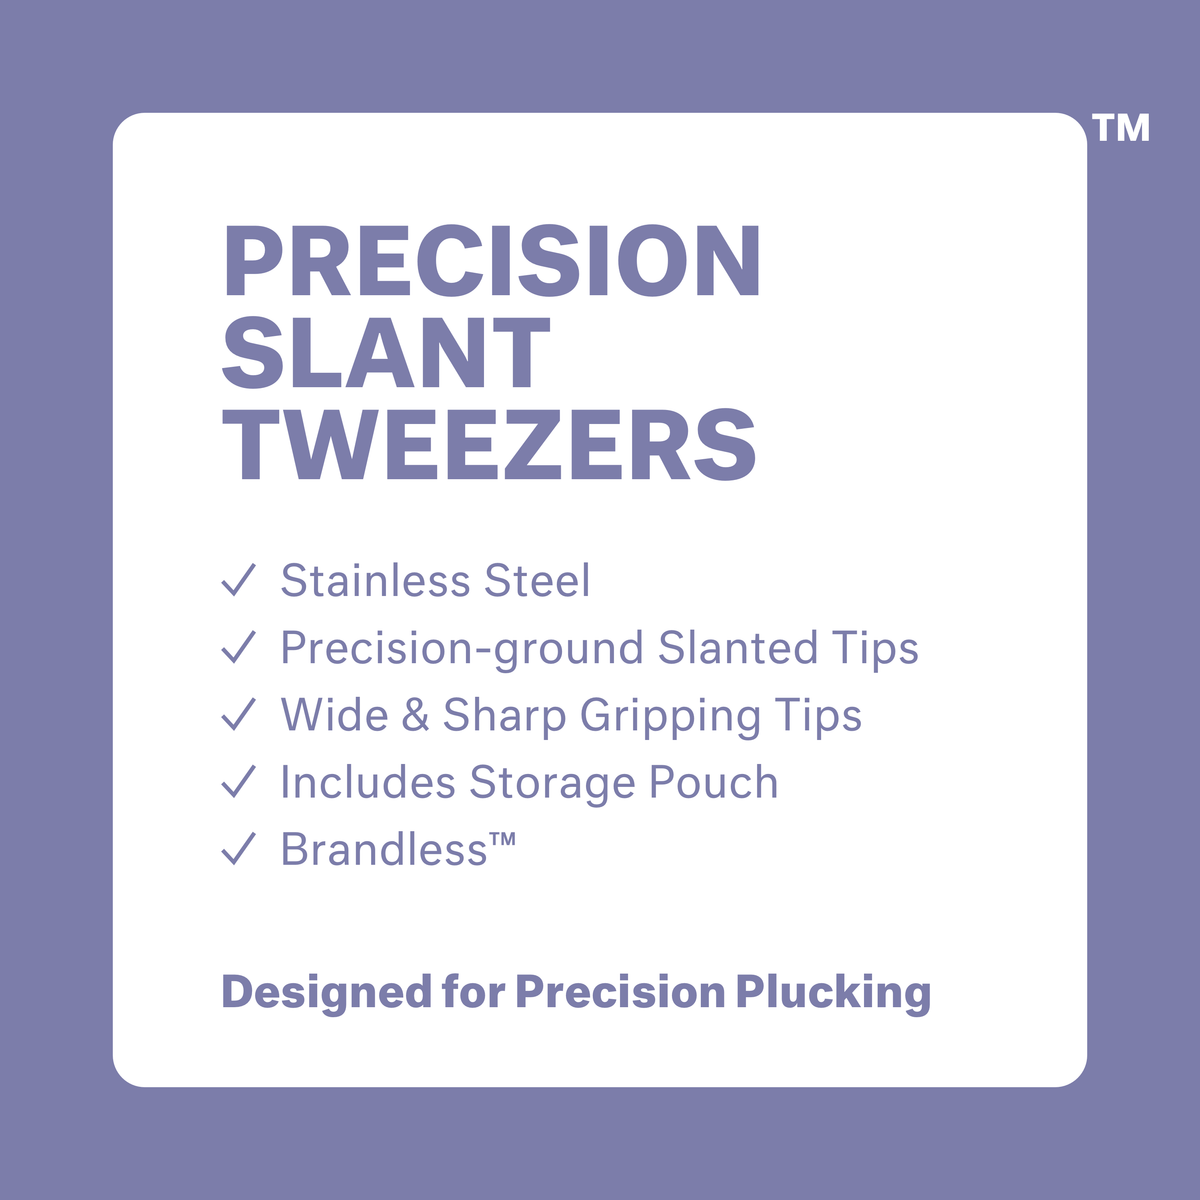 Precision Slant Tweezers: stainless steel, precision-ground slanted tips, wide and sharp gripping tips, includes storage pouch, brandless. Designed for precision plucking.